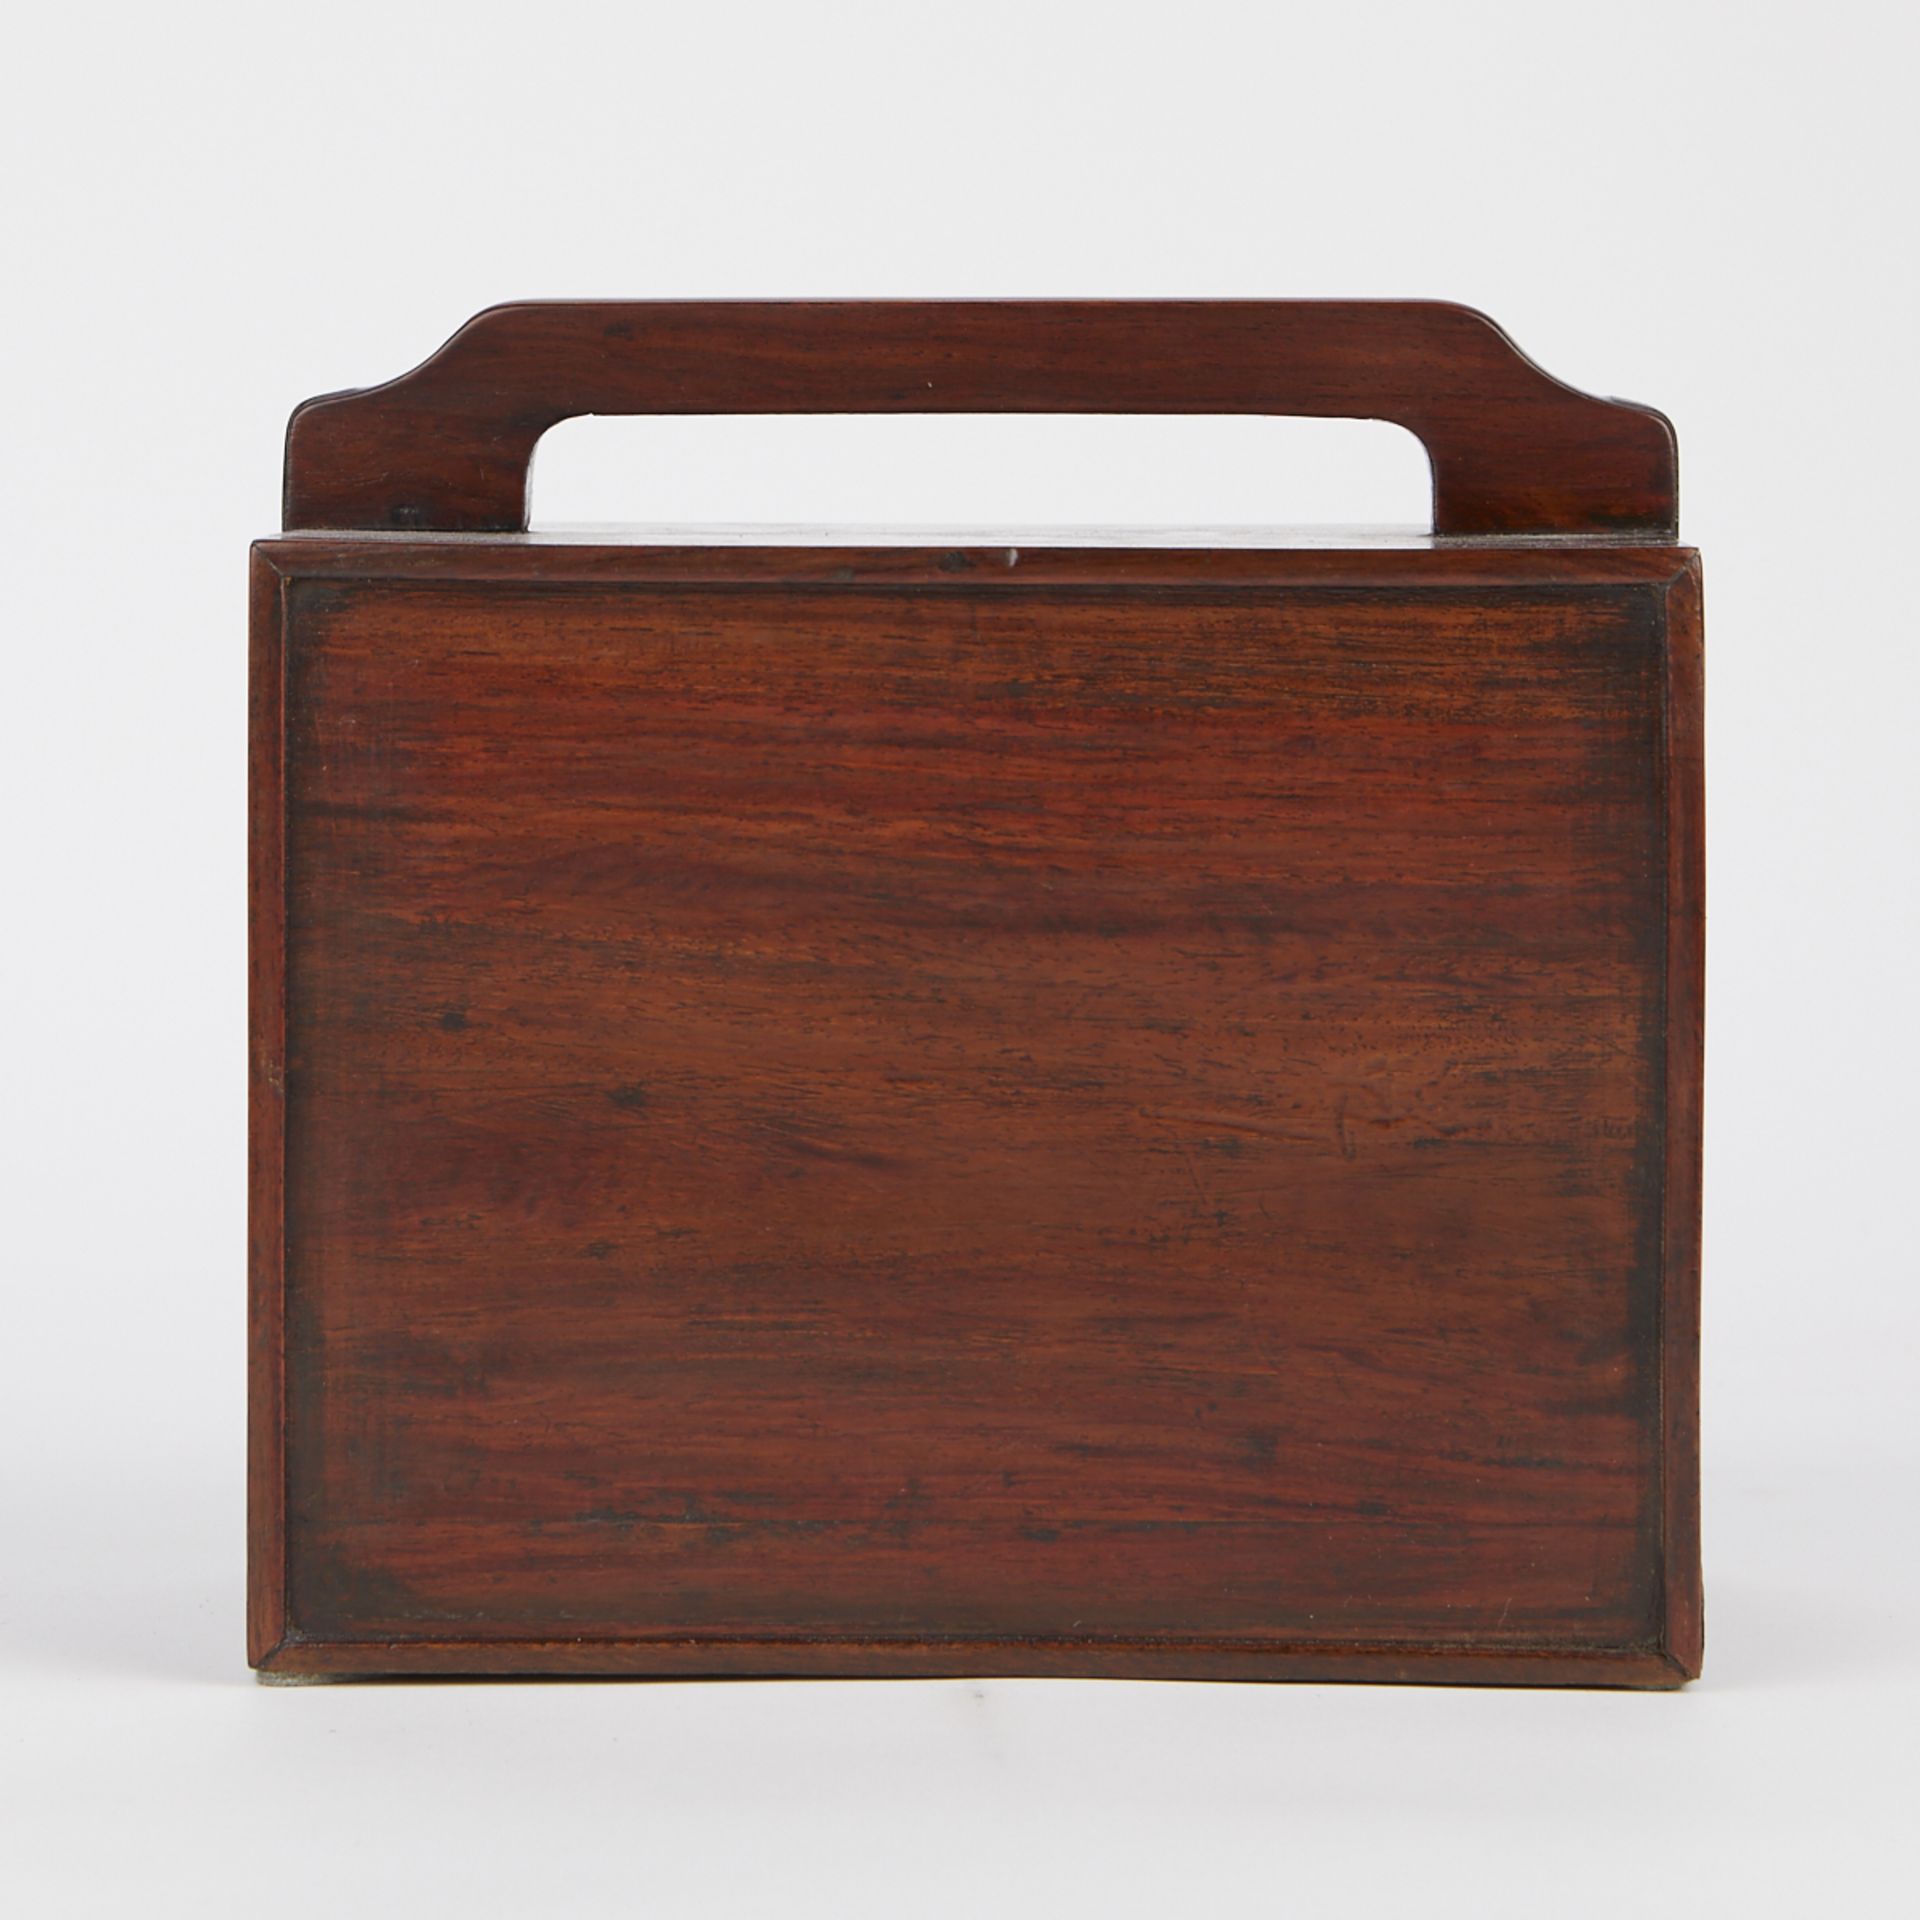 Chinese Huanghuali Rosewood Doctor's Box - Image 5 of 7